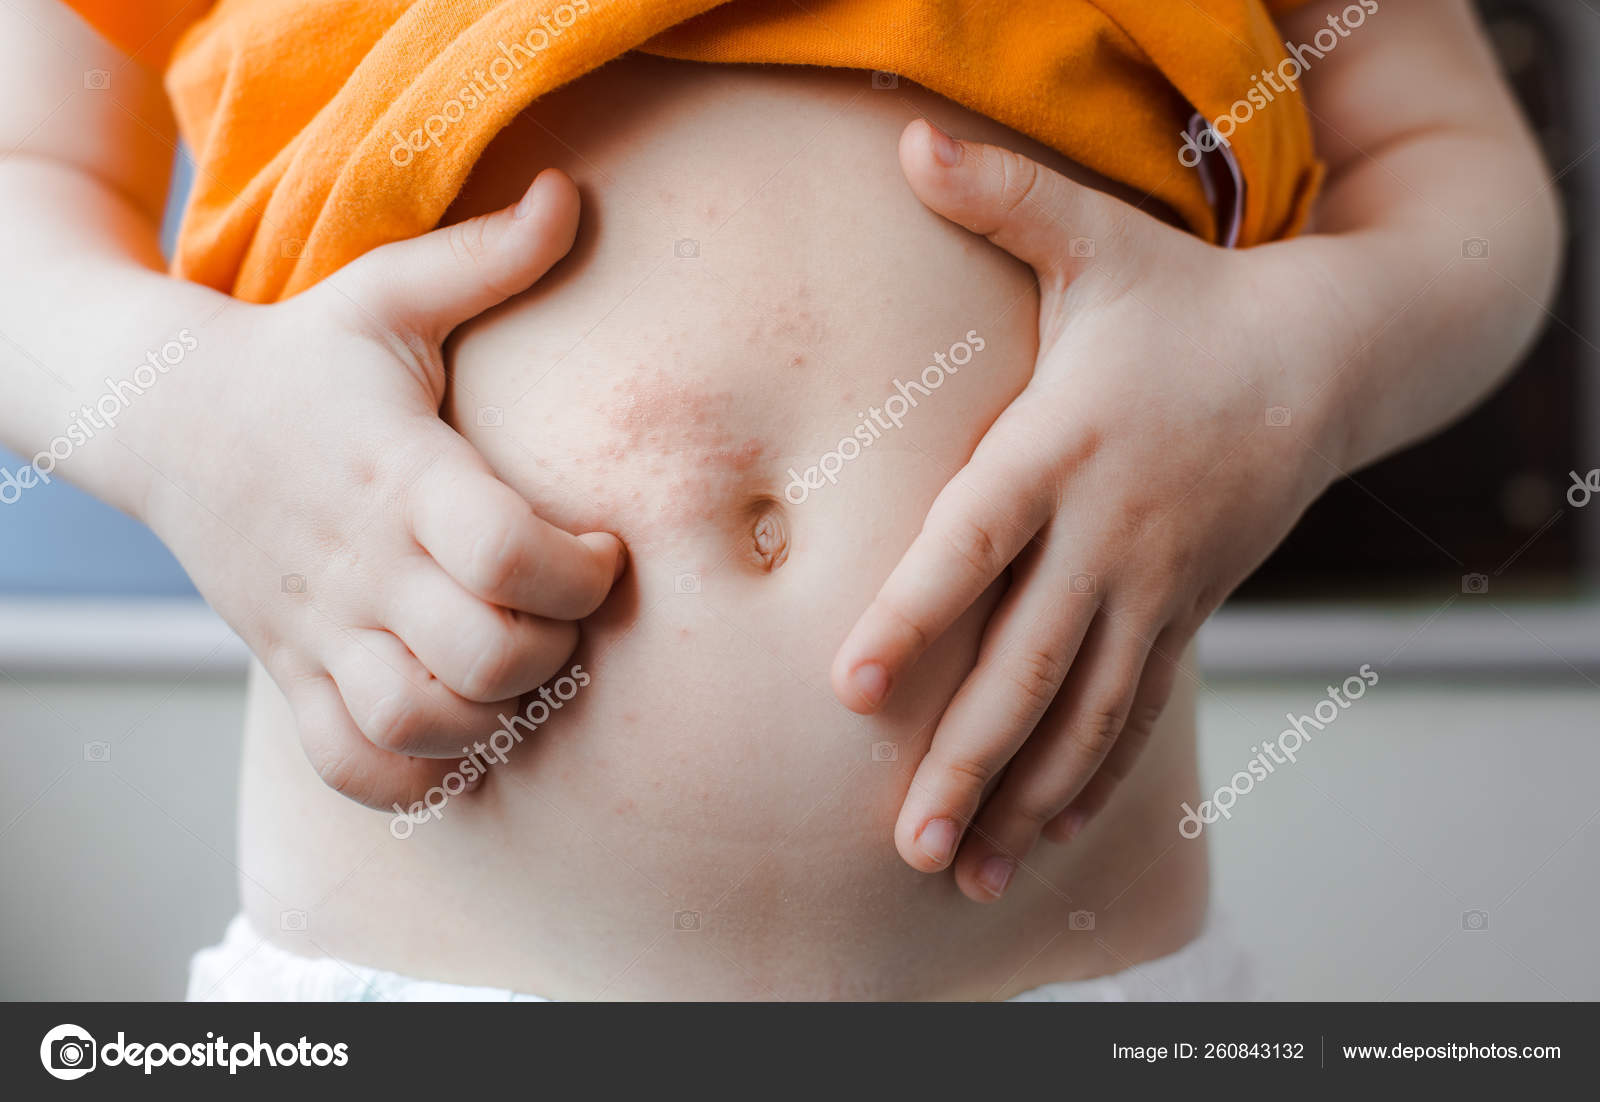 Chicken Pox Baby The Varicella Zoster Virus Or Scabies Rash On